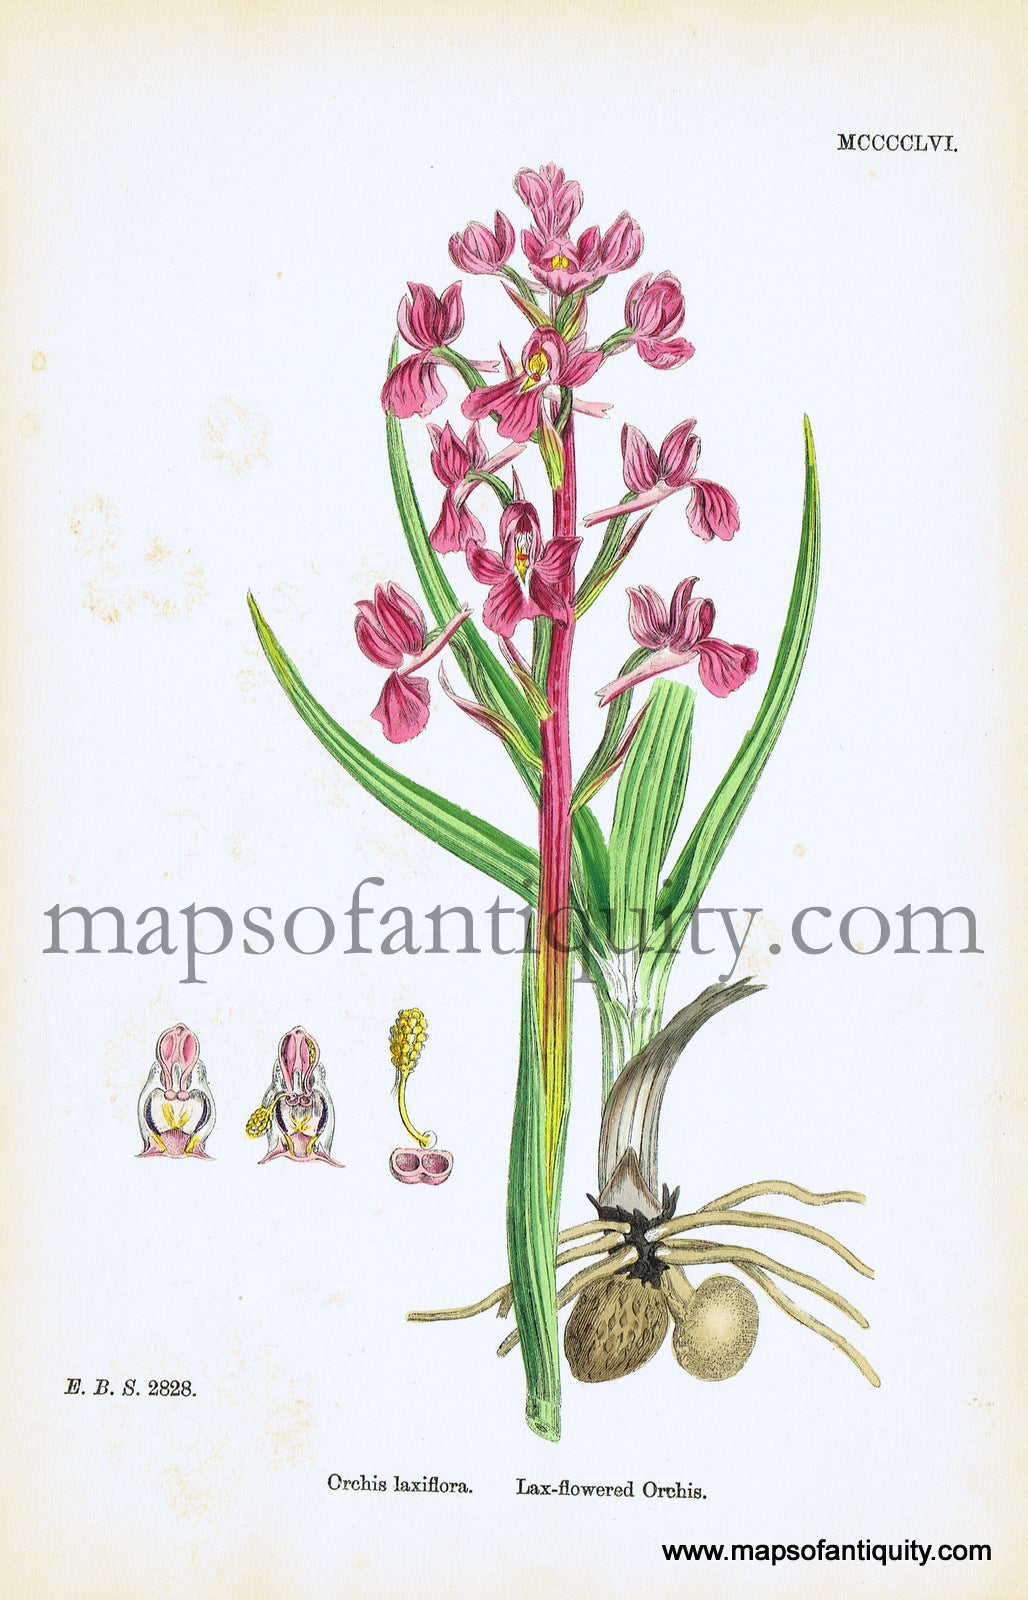 Antique-Hand-Colored-Print-Orchis-laxiflora-Antique-Prints-Natural-History-Botanical-c.-1860-Sowerby-Maps-Of-Antiquity